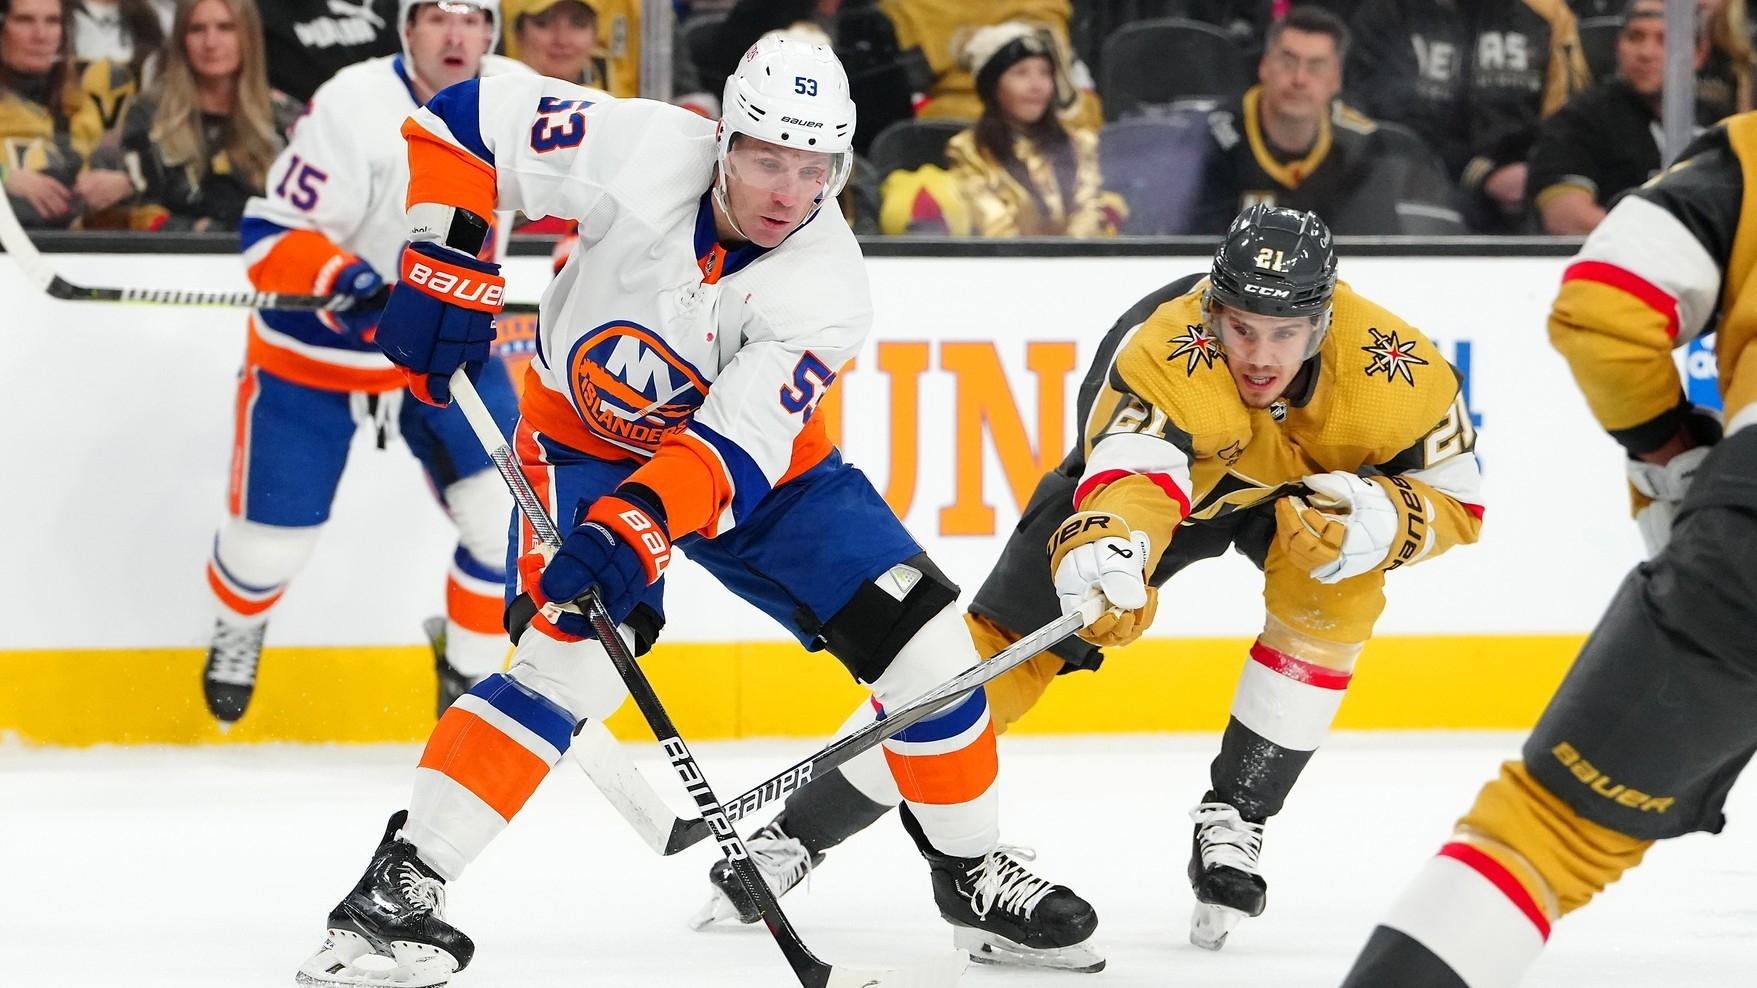 New York Islanders center Casey Cizikas (53) skates ahead of Vegas Golden Knights center Brett Howden (21) during the first period at T-Mobile Arena. / Stephen R. Sylvanie-USA TODAY Sports